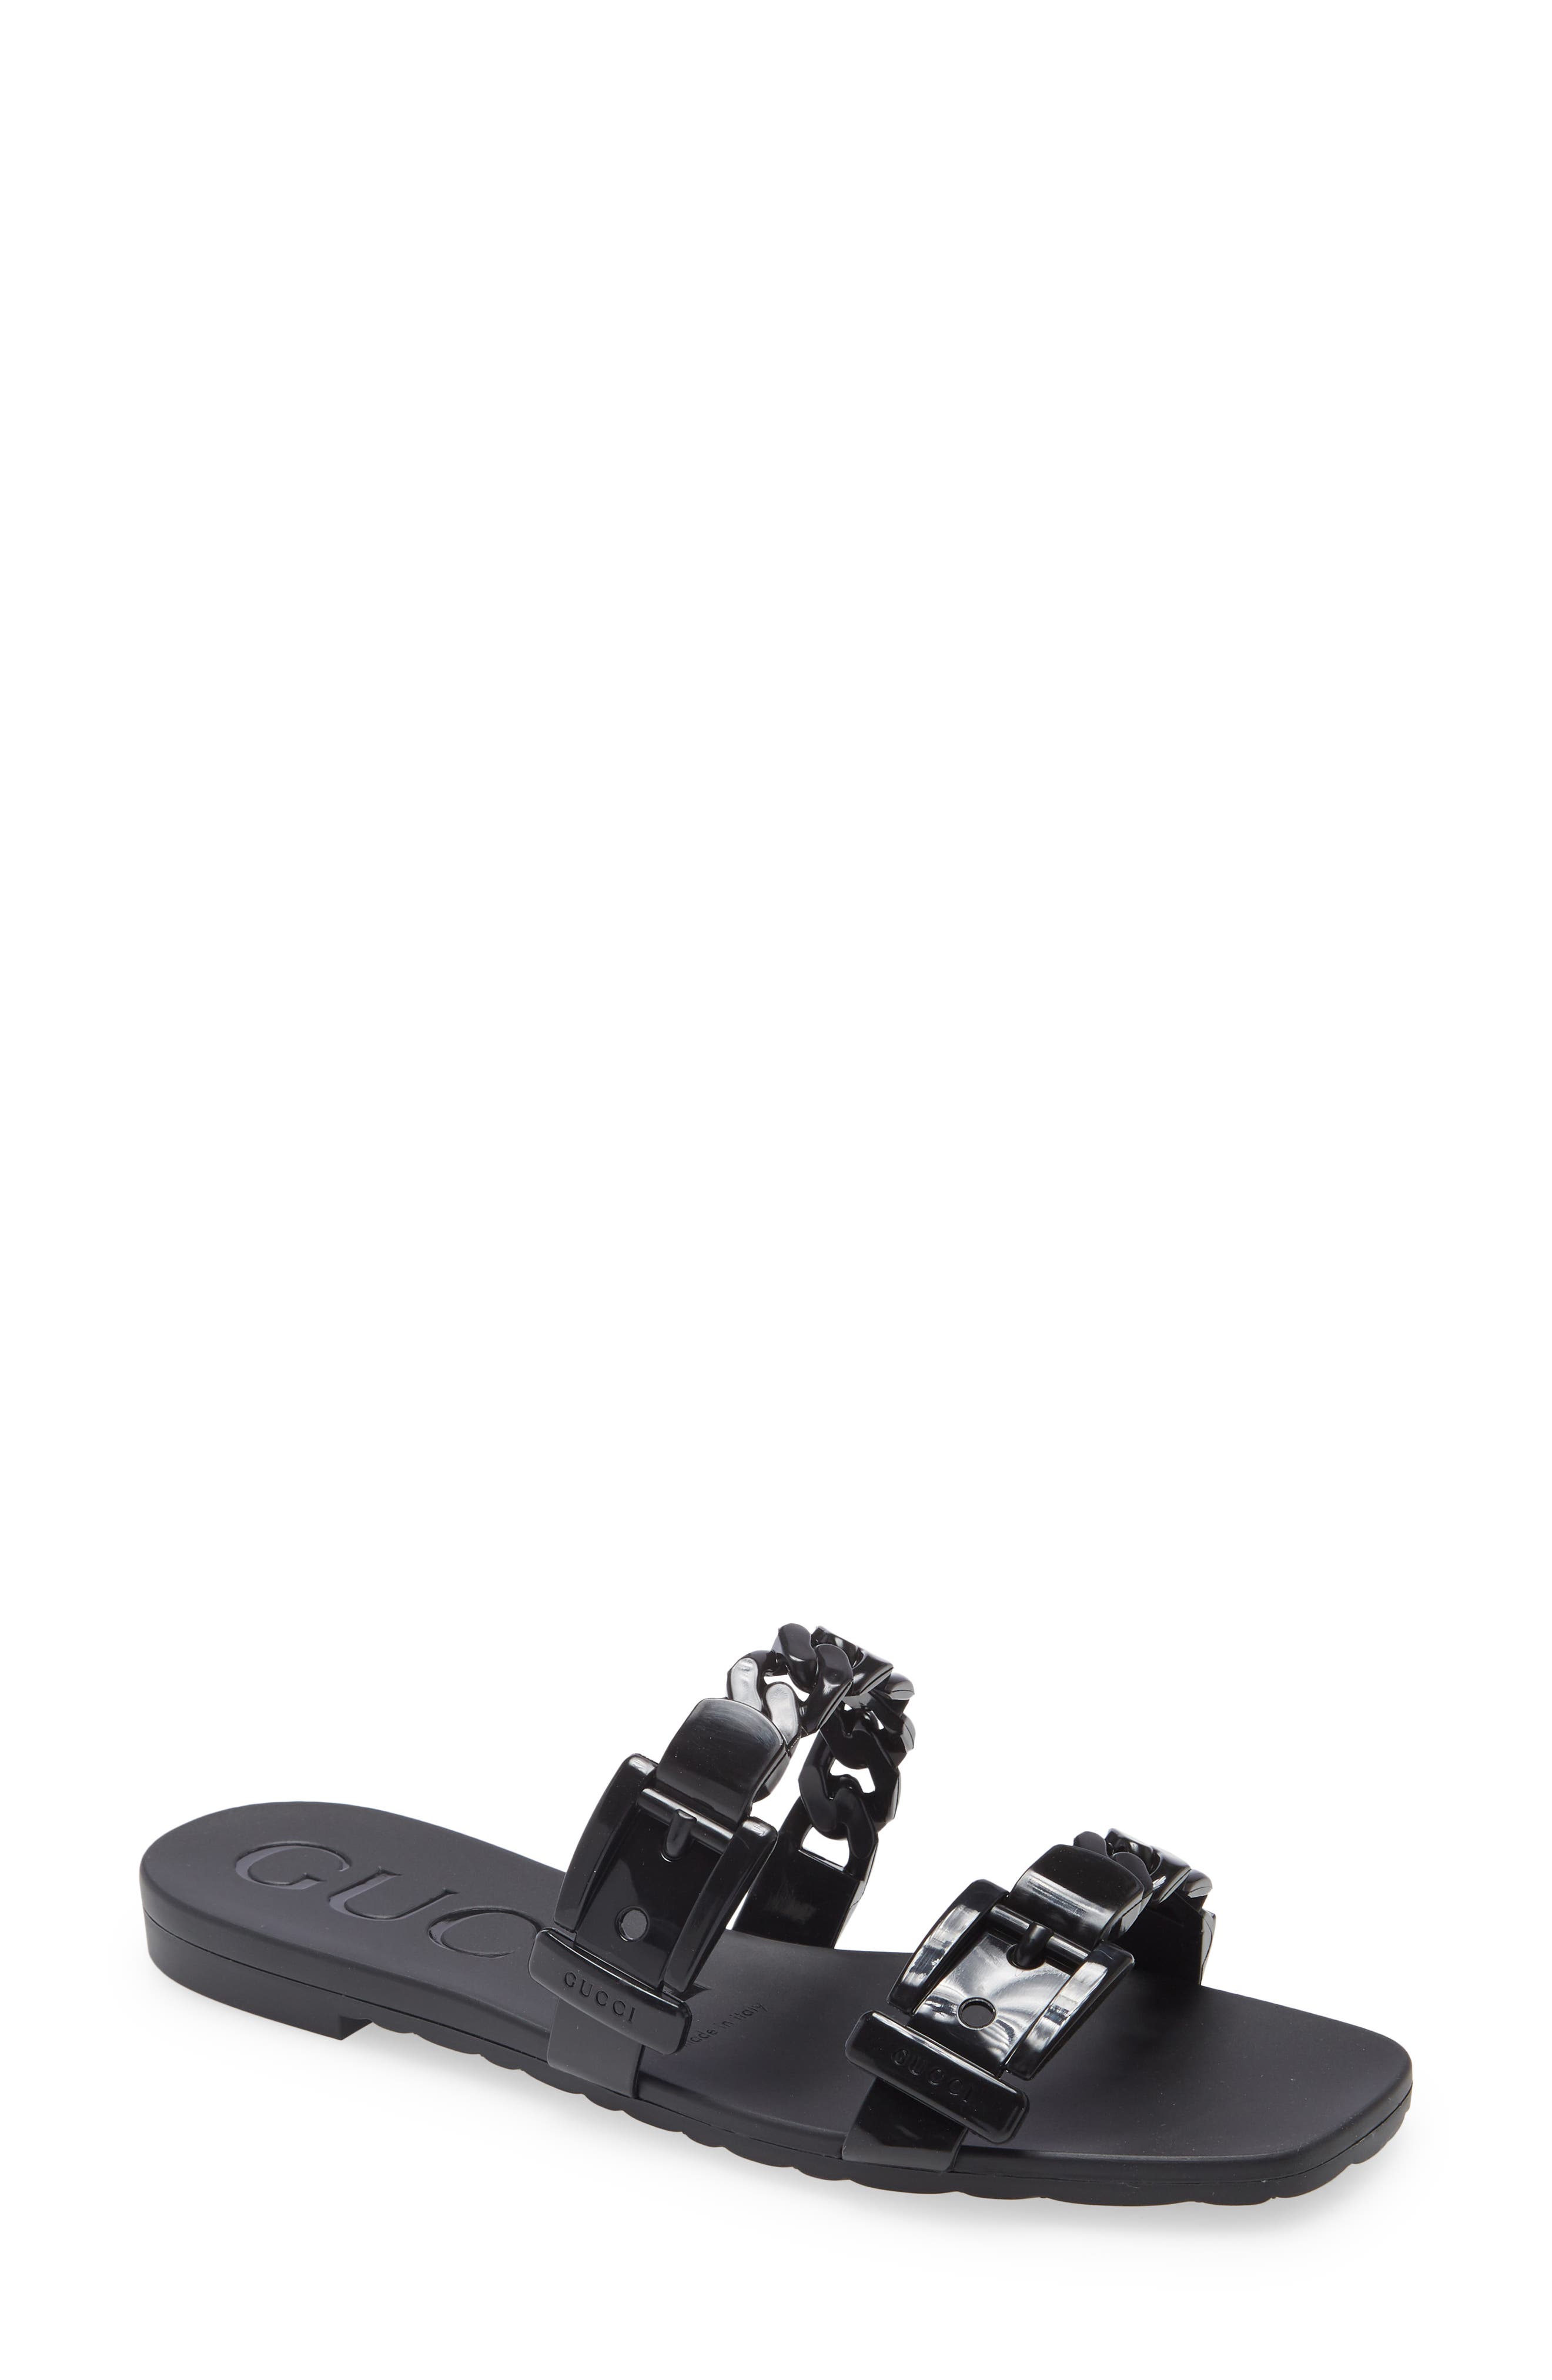 gucci sandals womens nordstrom